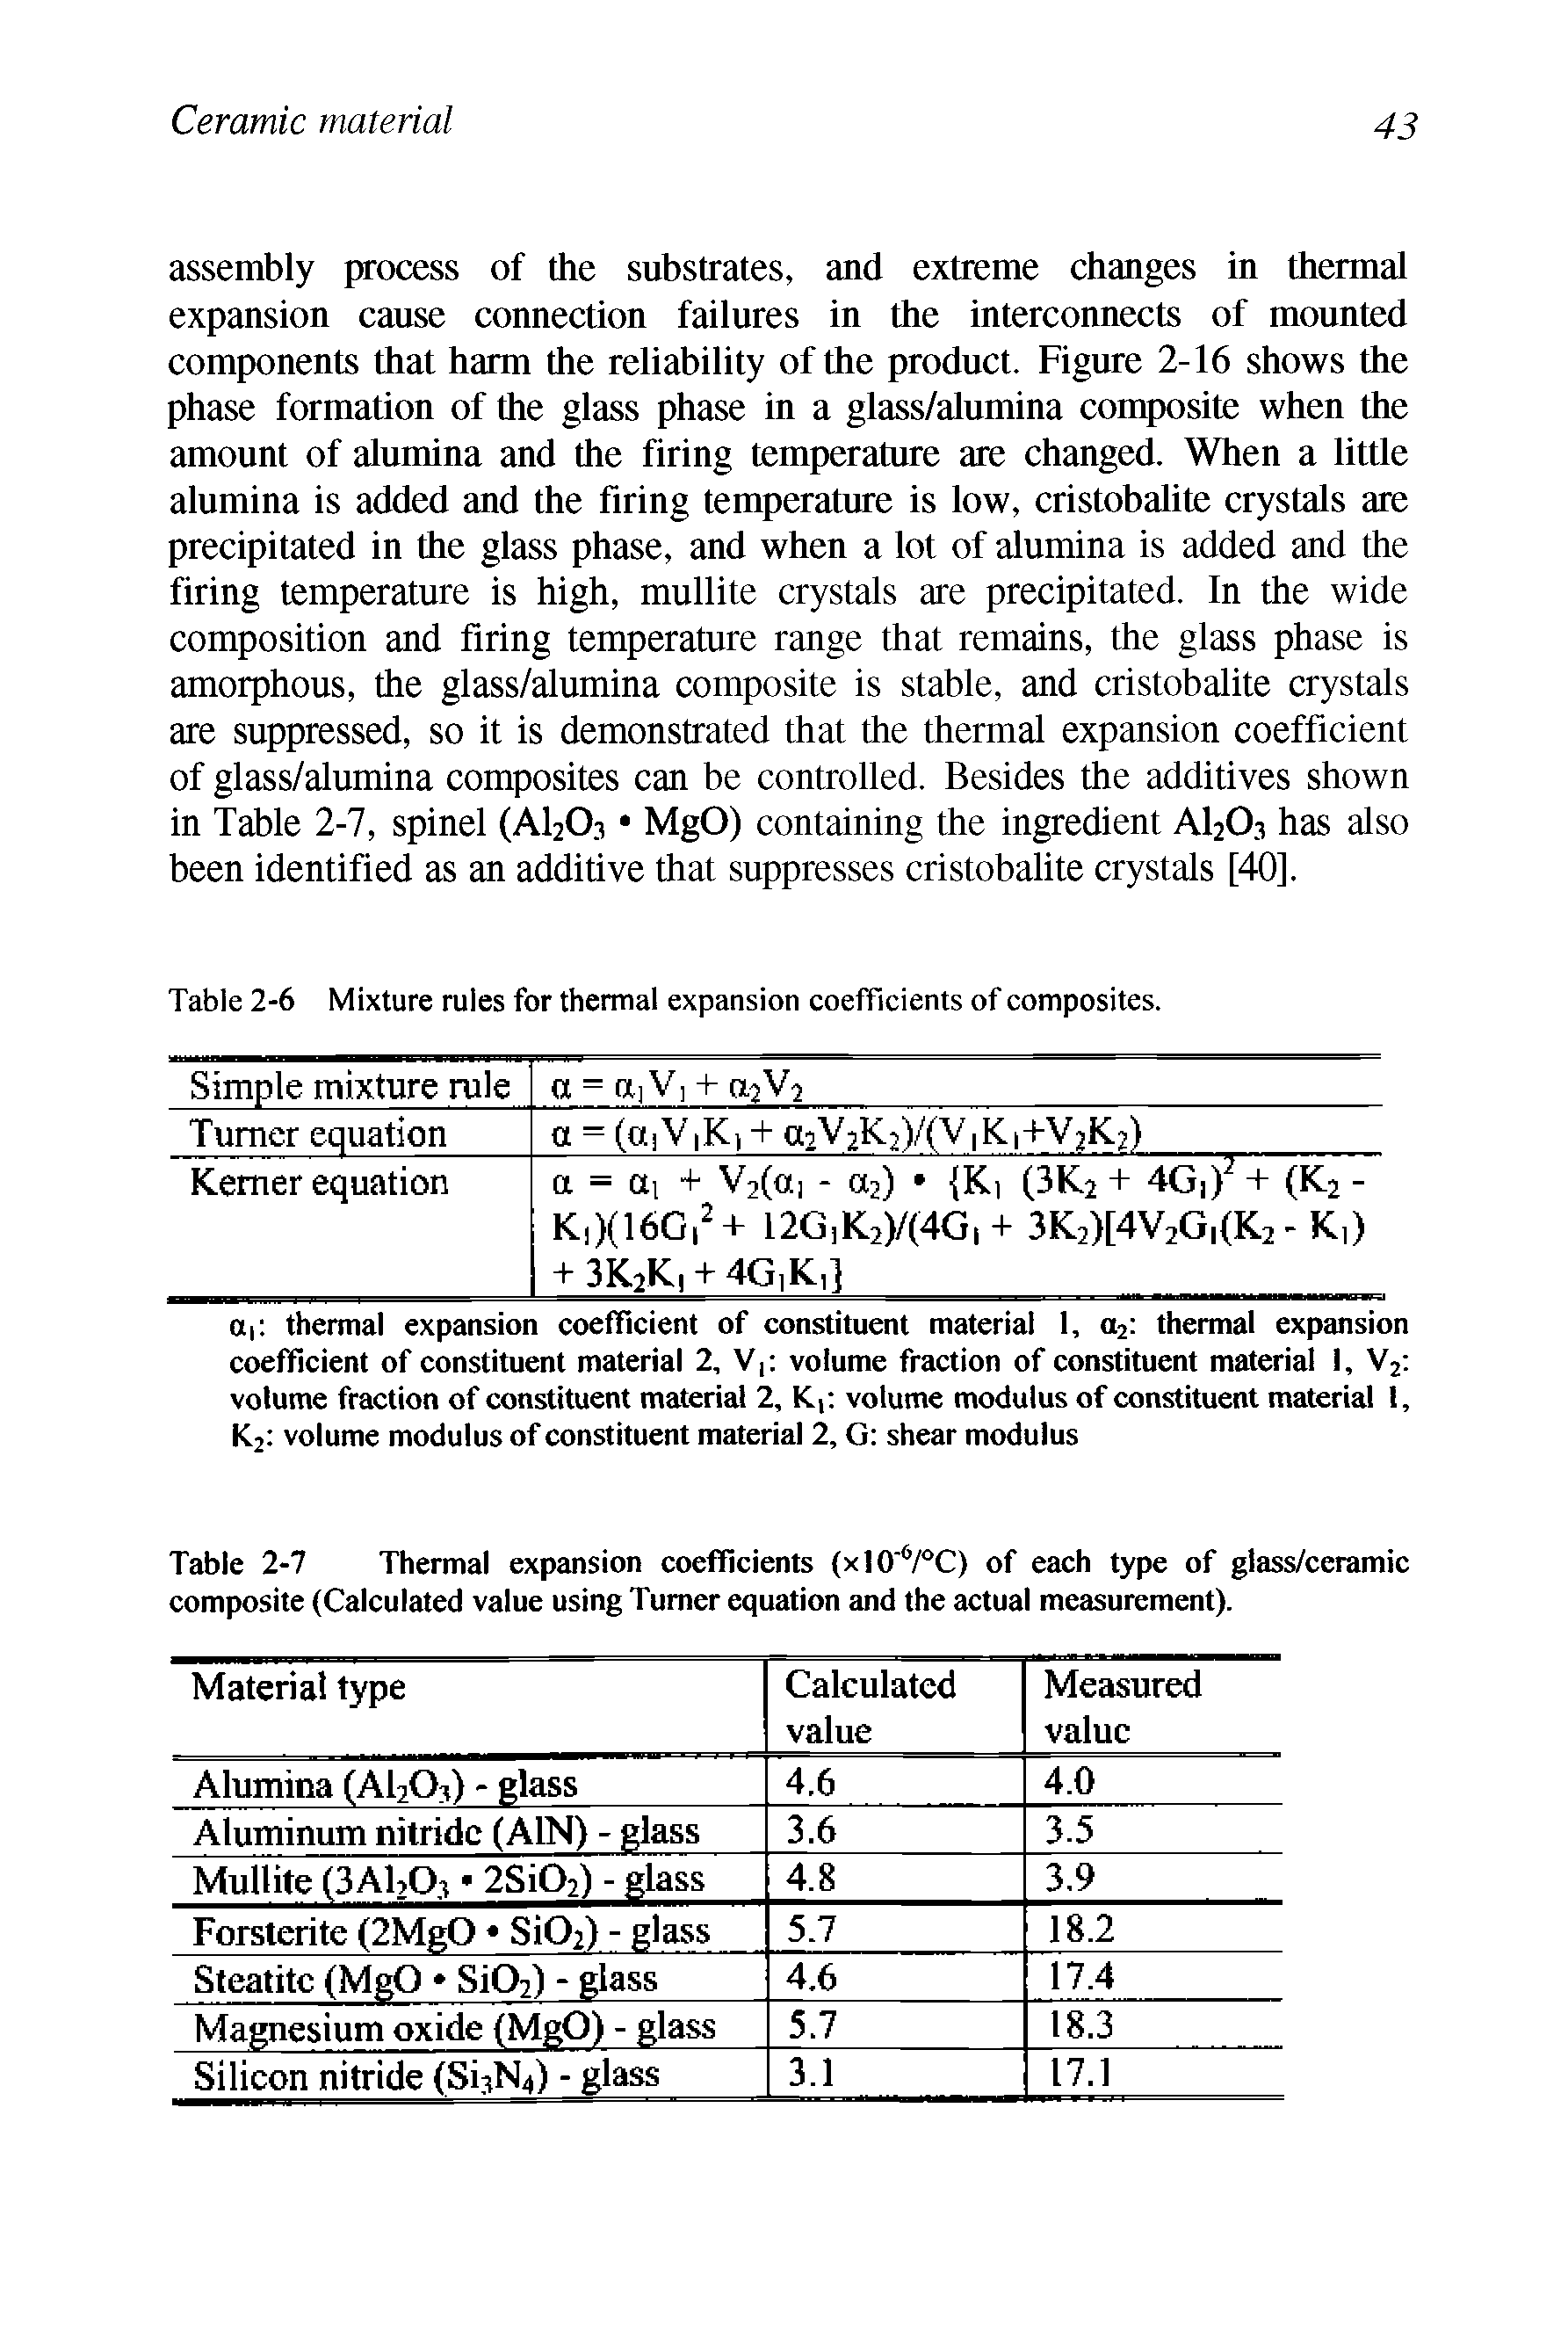 Table 2-6 Mixture rules for thermal expansion coefficients of composites.